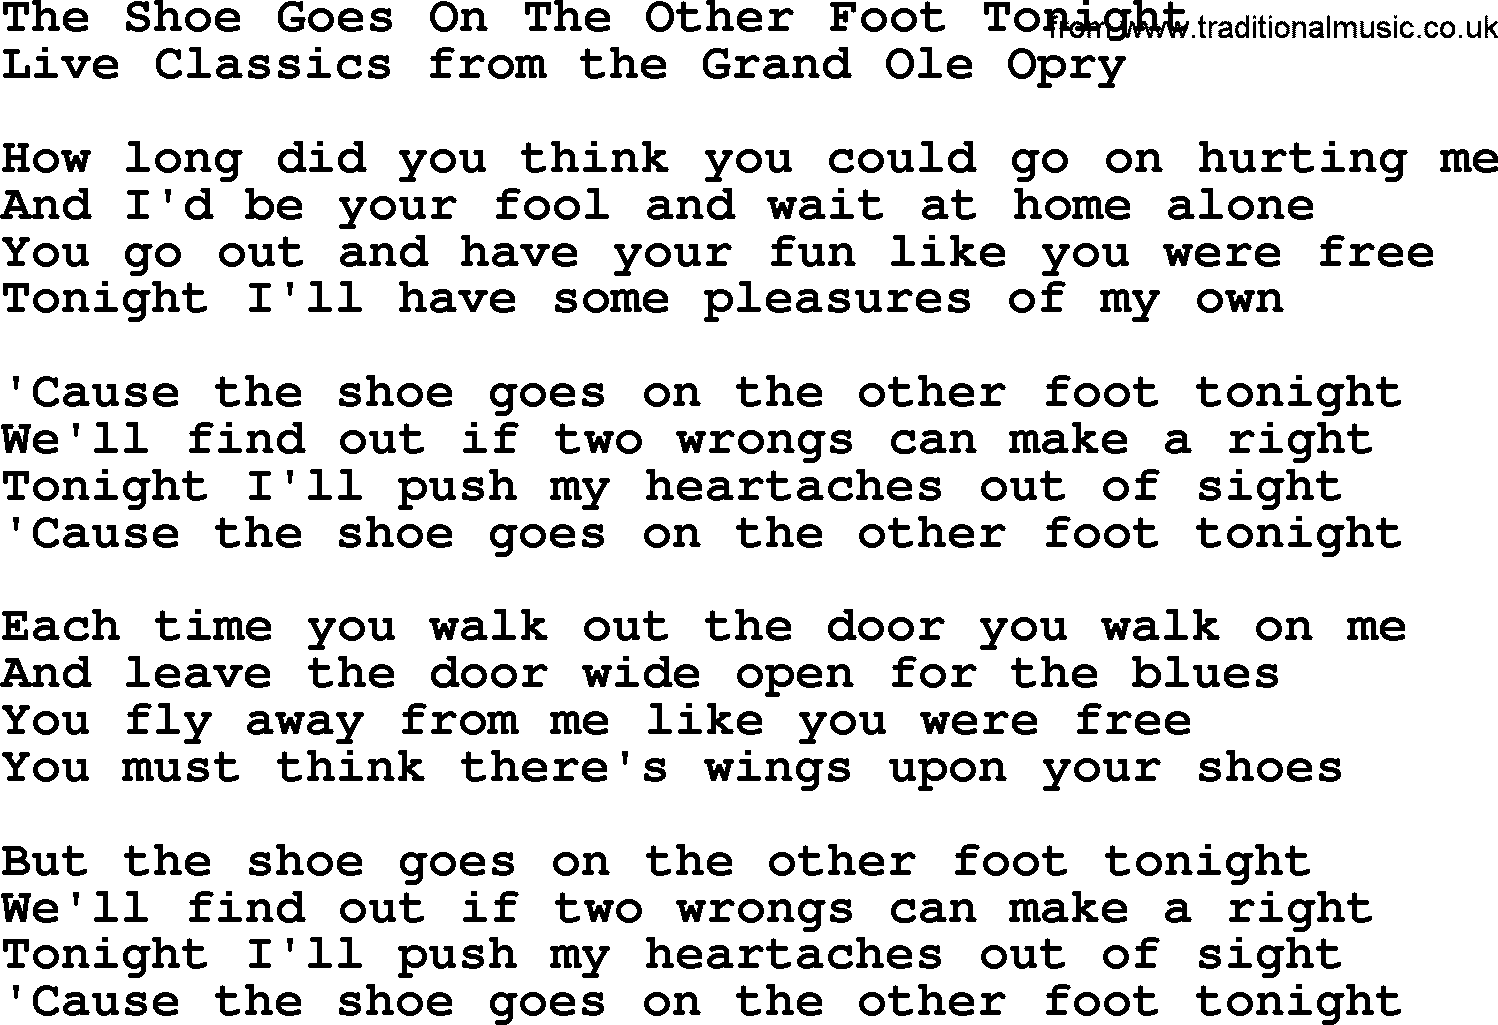 Marty Robbins song: The Shoe Goes On The Other Foot Tonight, lyrics